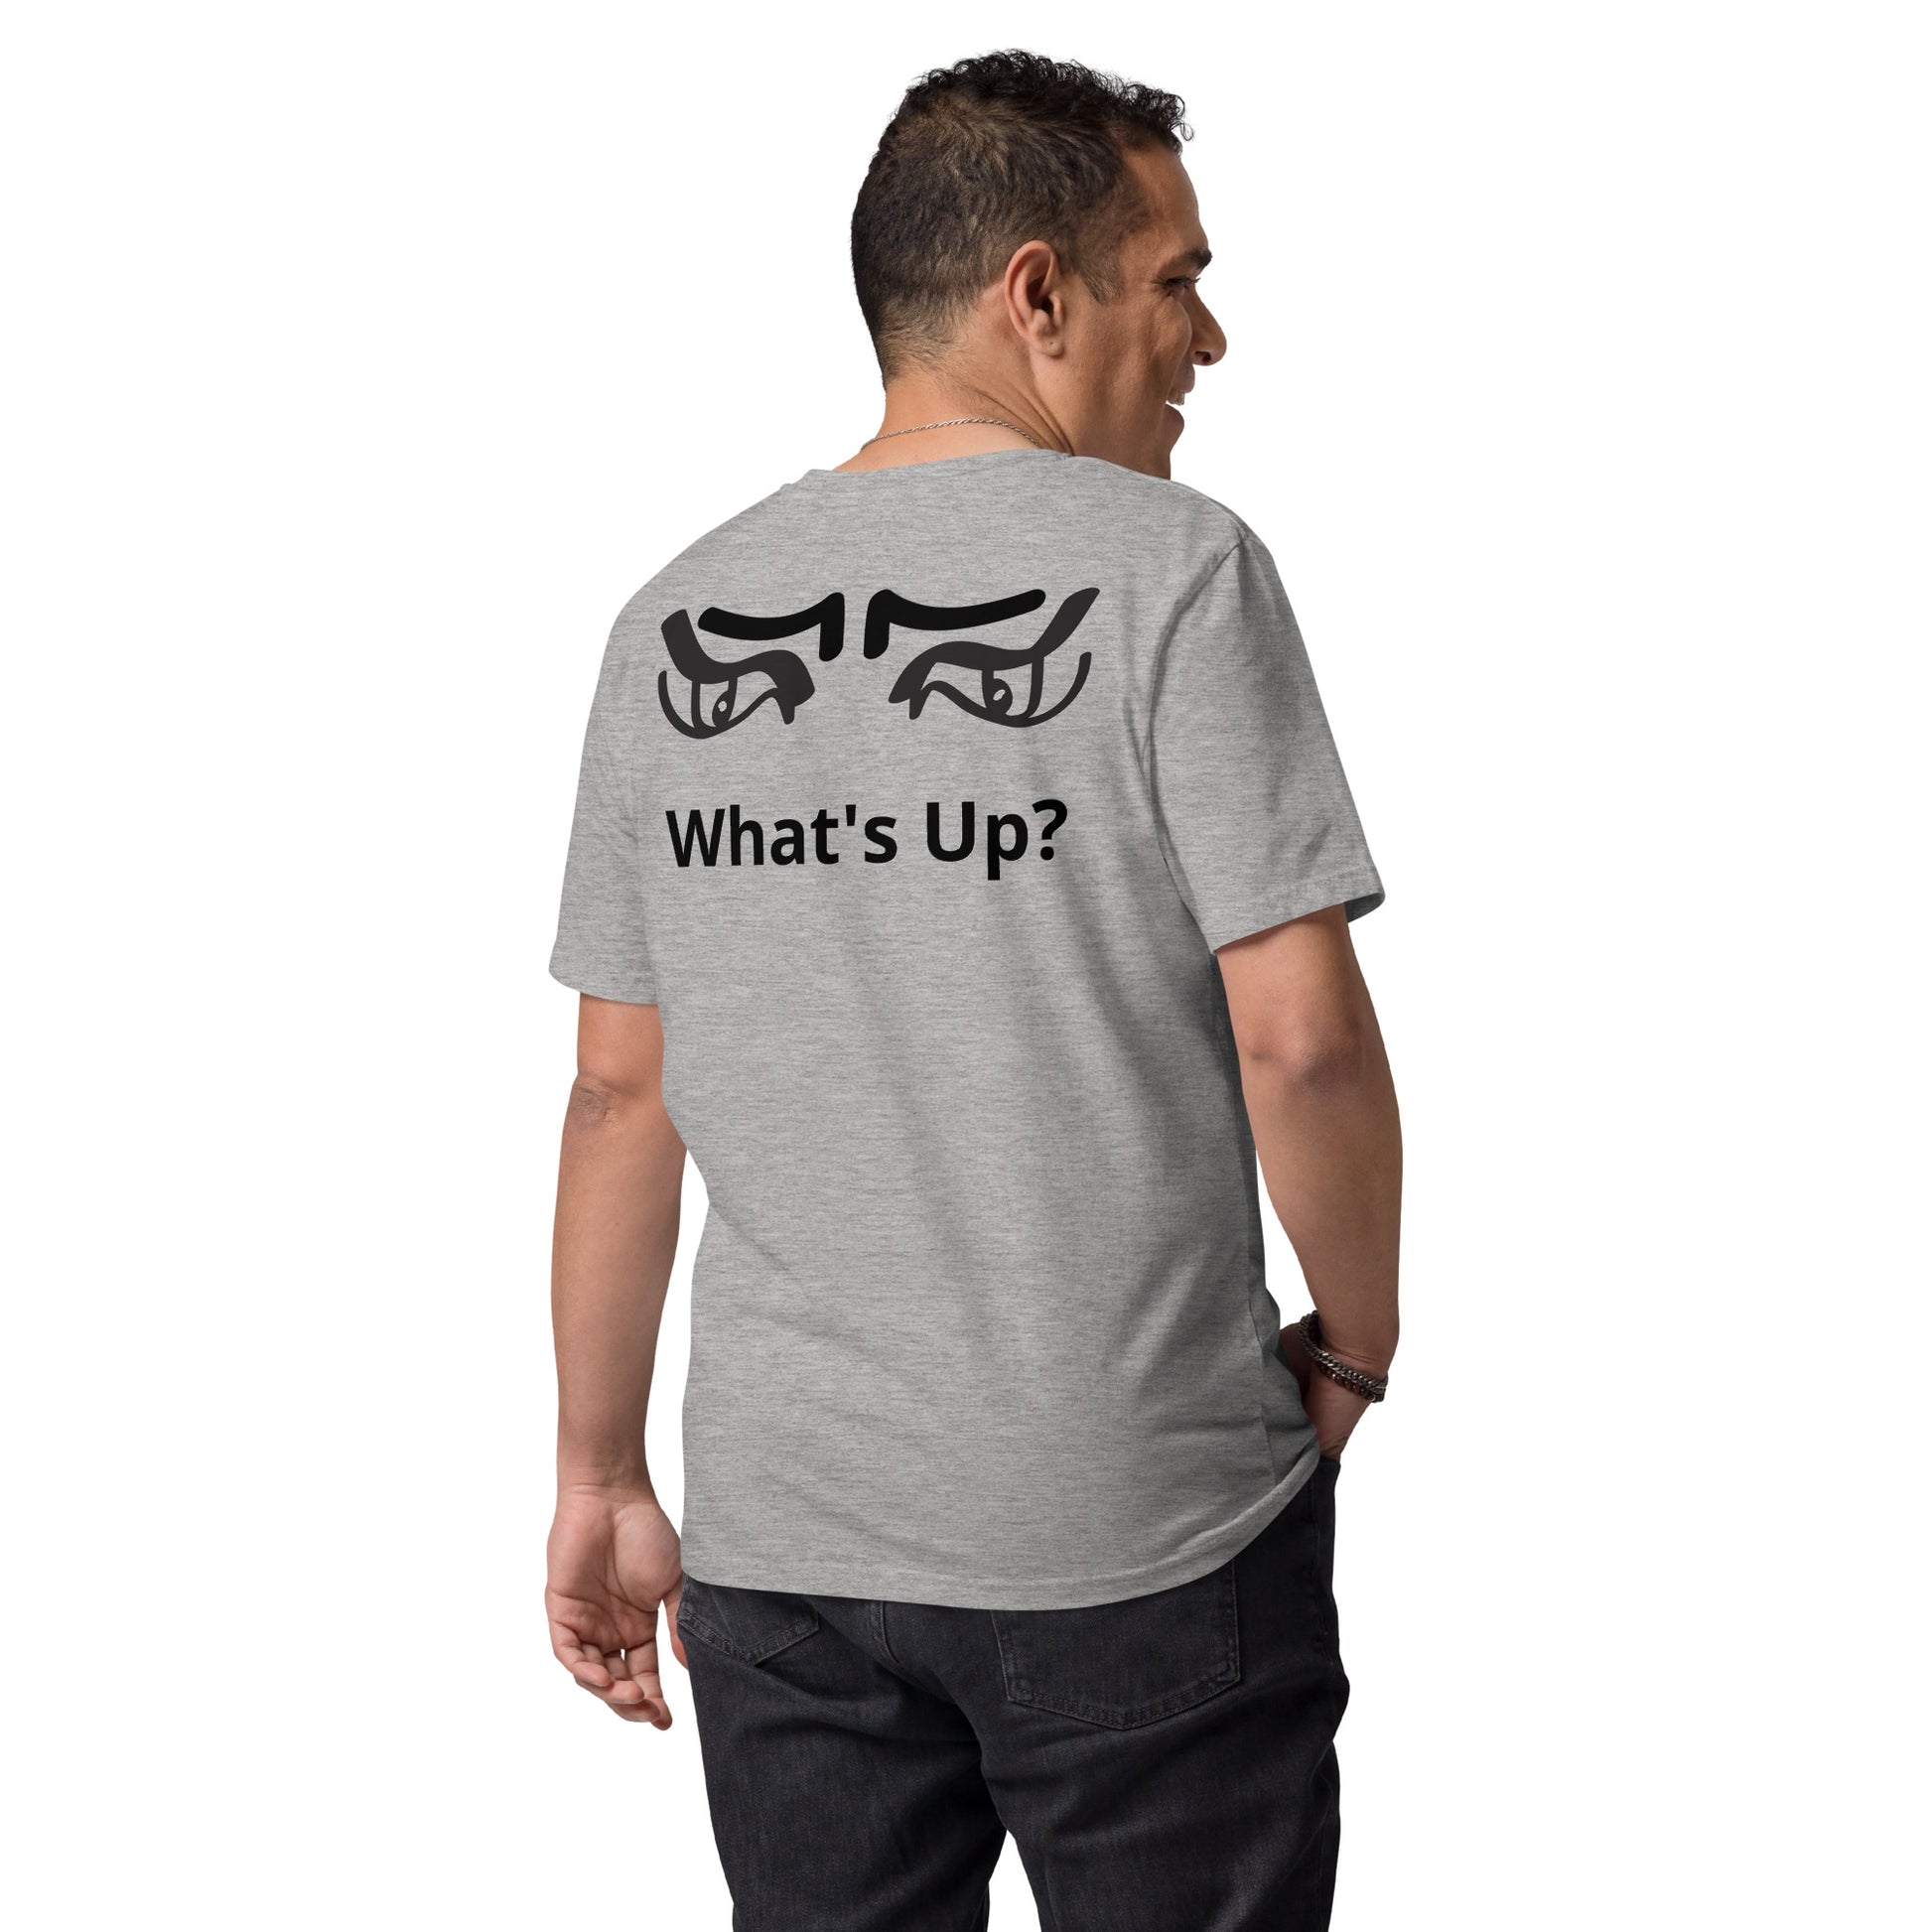 Embrace your individuality and make a bold statement with the "What's Up?" BeSculpt Unisex Organic Cotton T-shirt – because sometimes, it's okay to let your clothes do the talking!